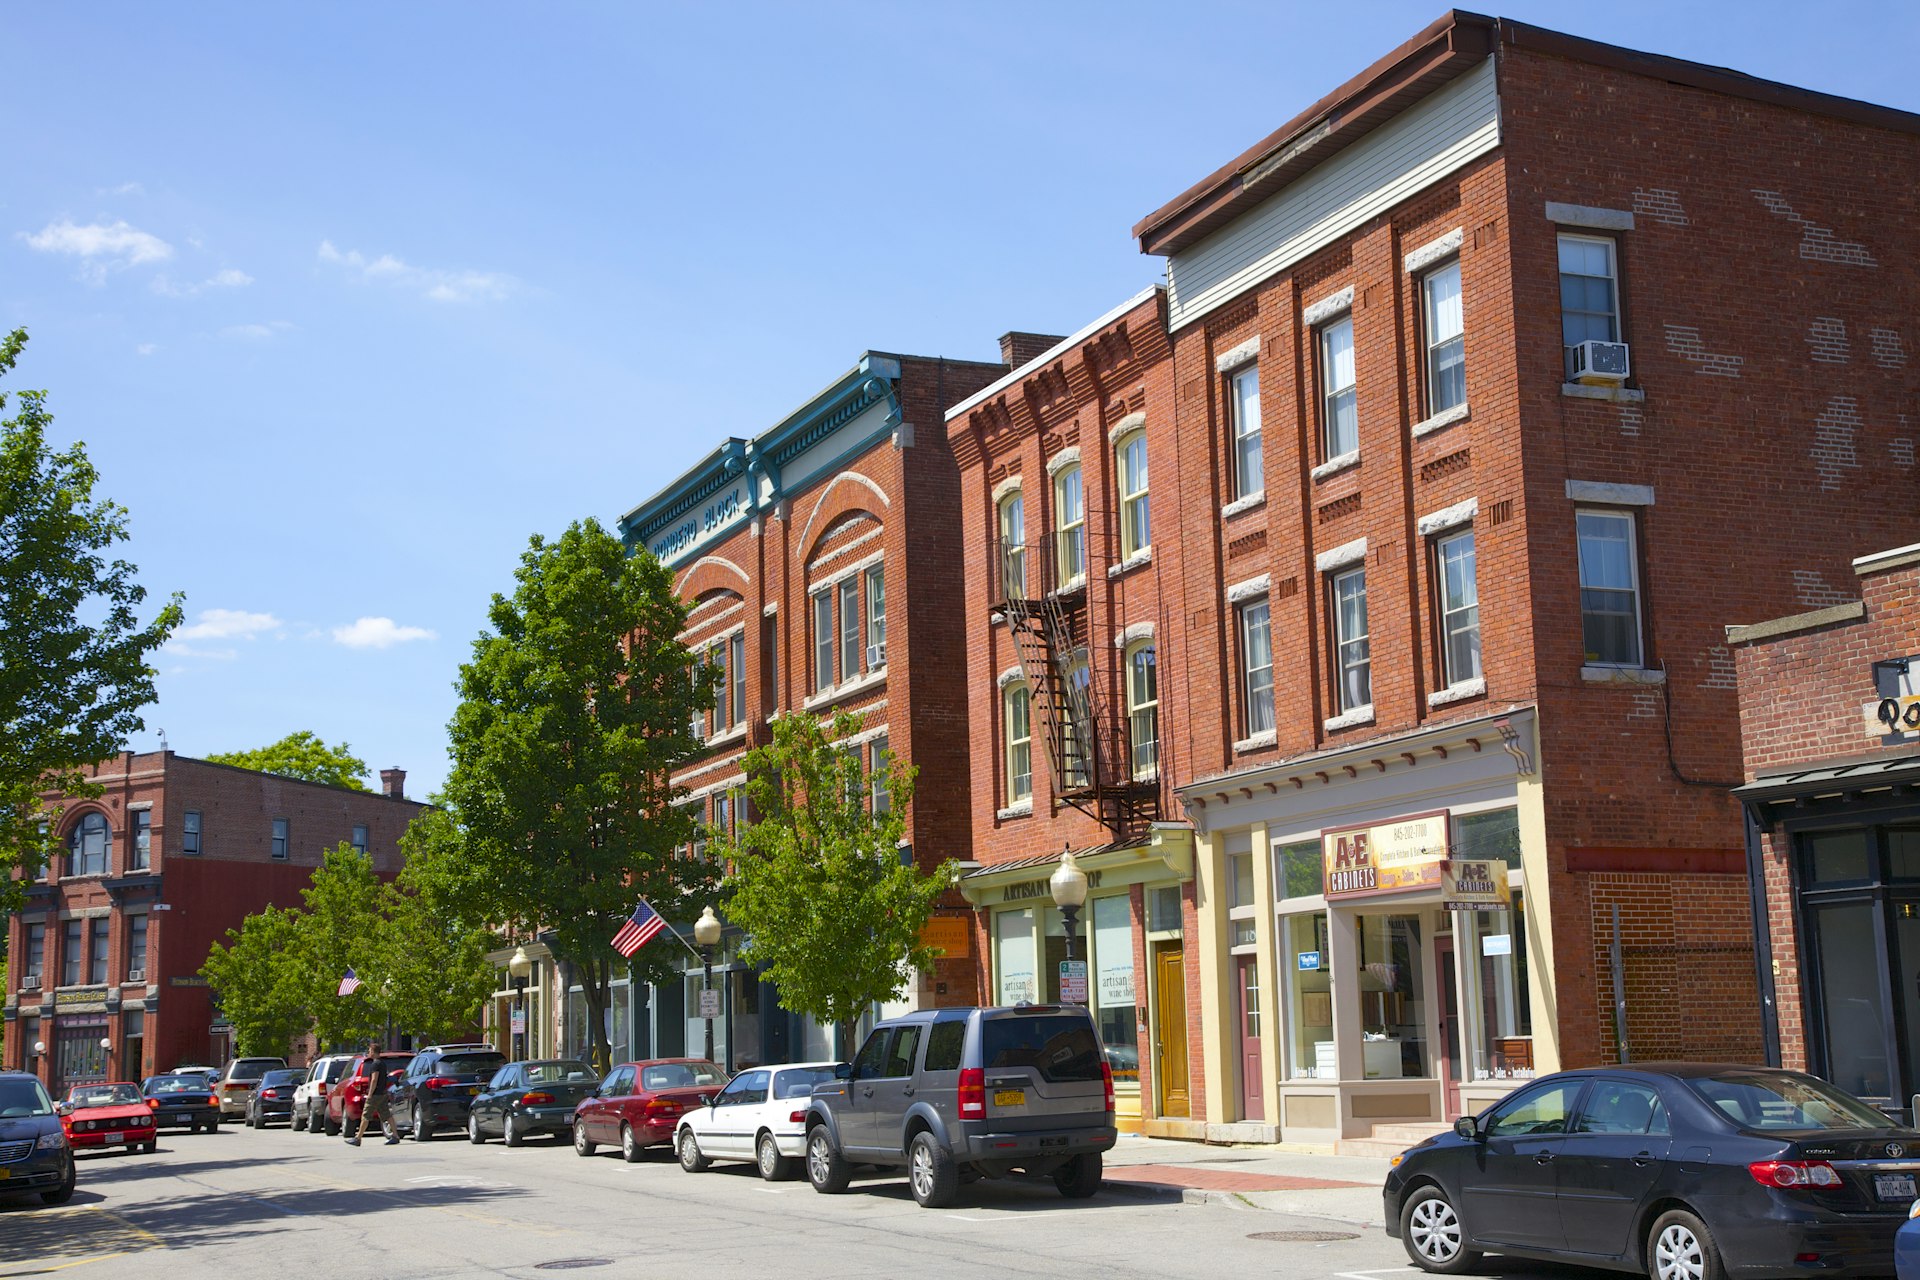 Main Street in Beacon, New York, with the mountains in the distance